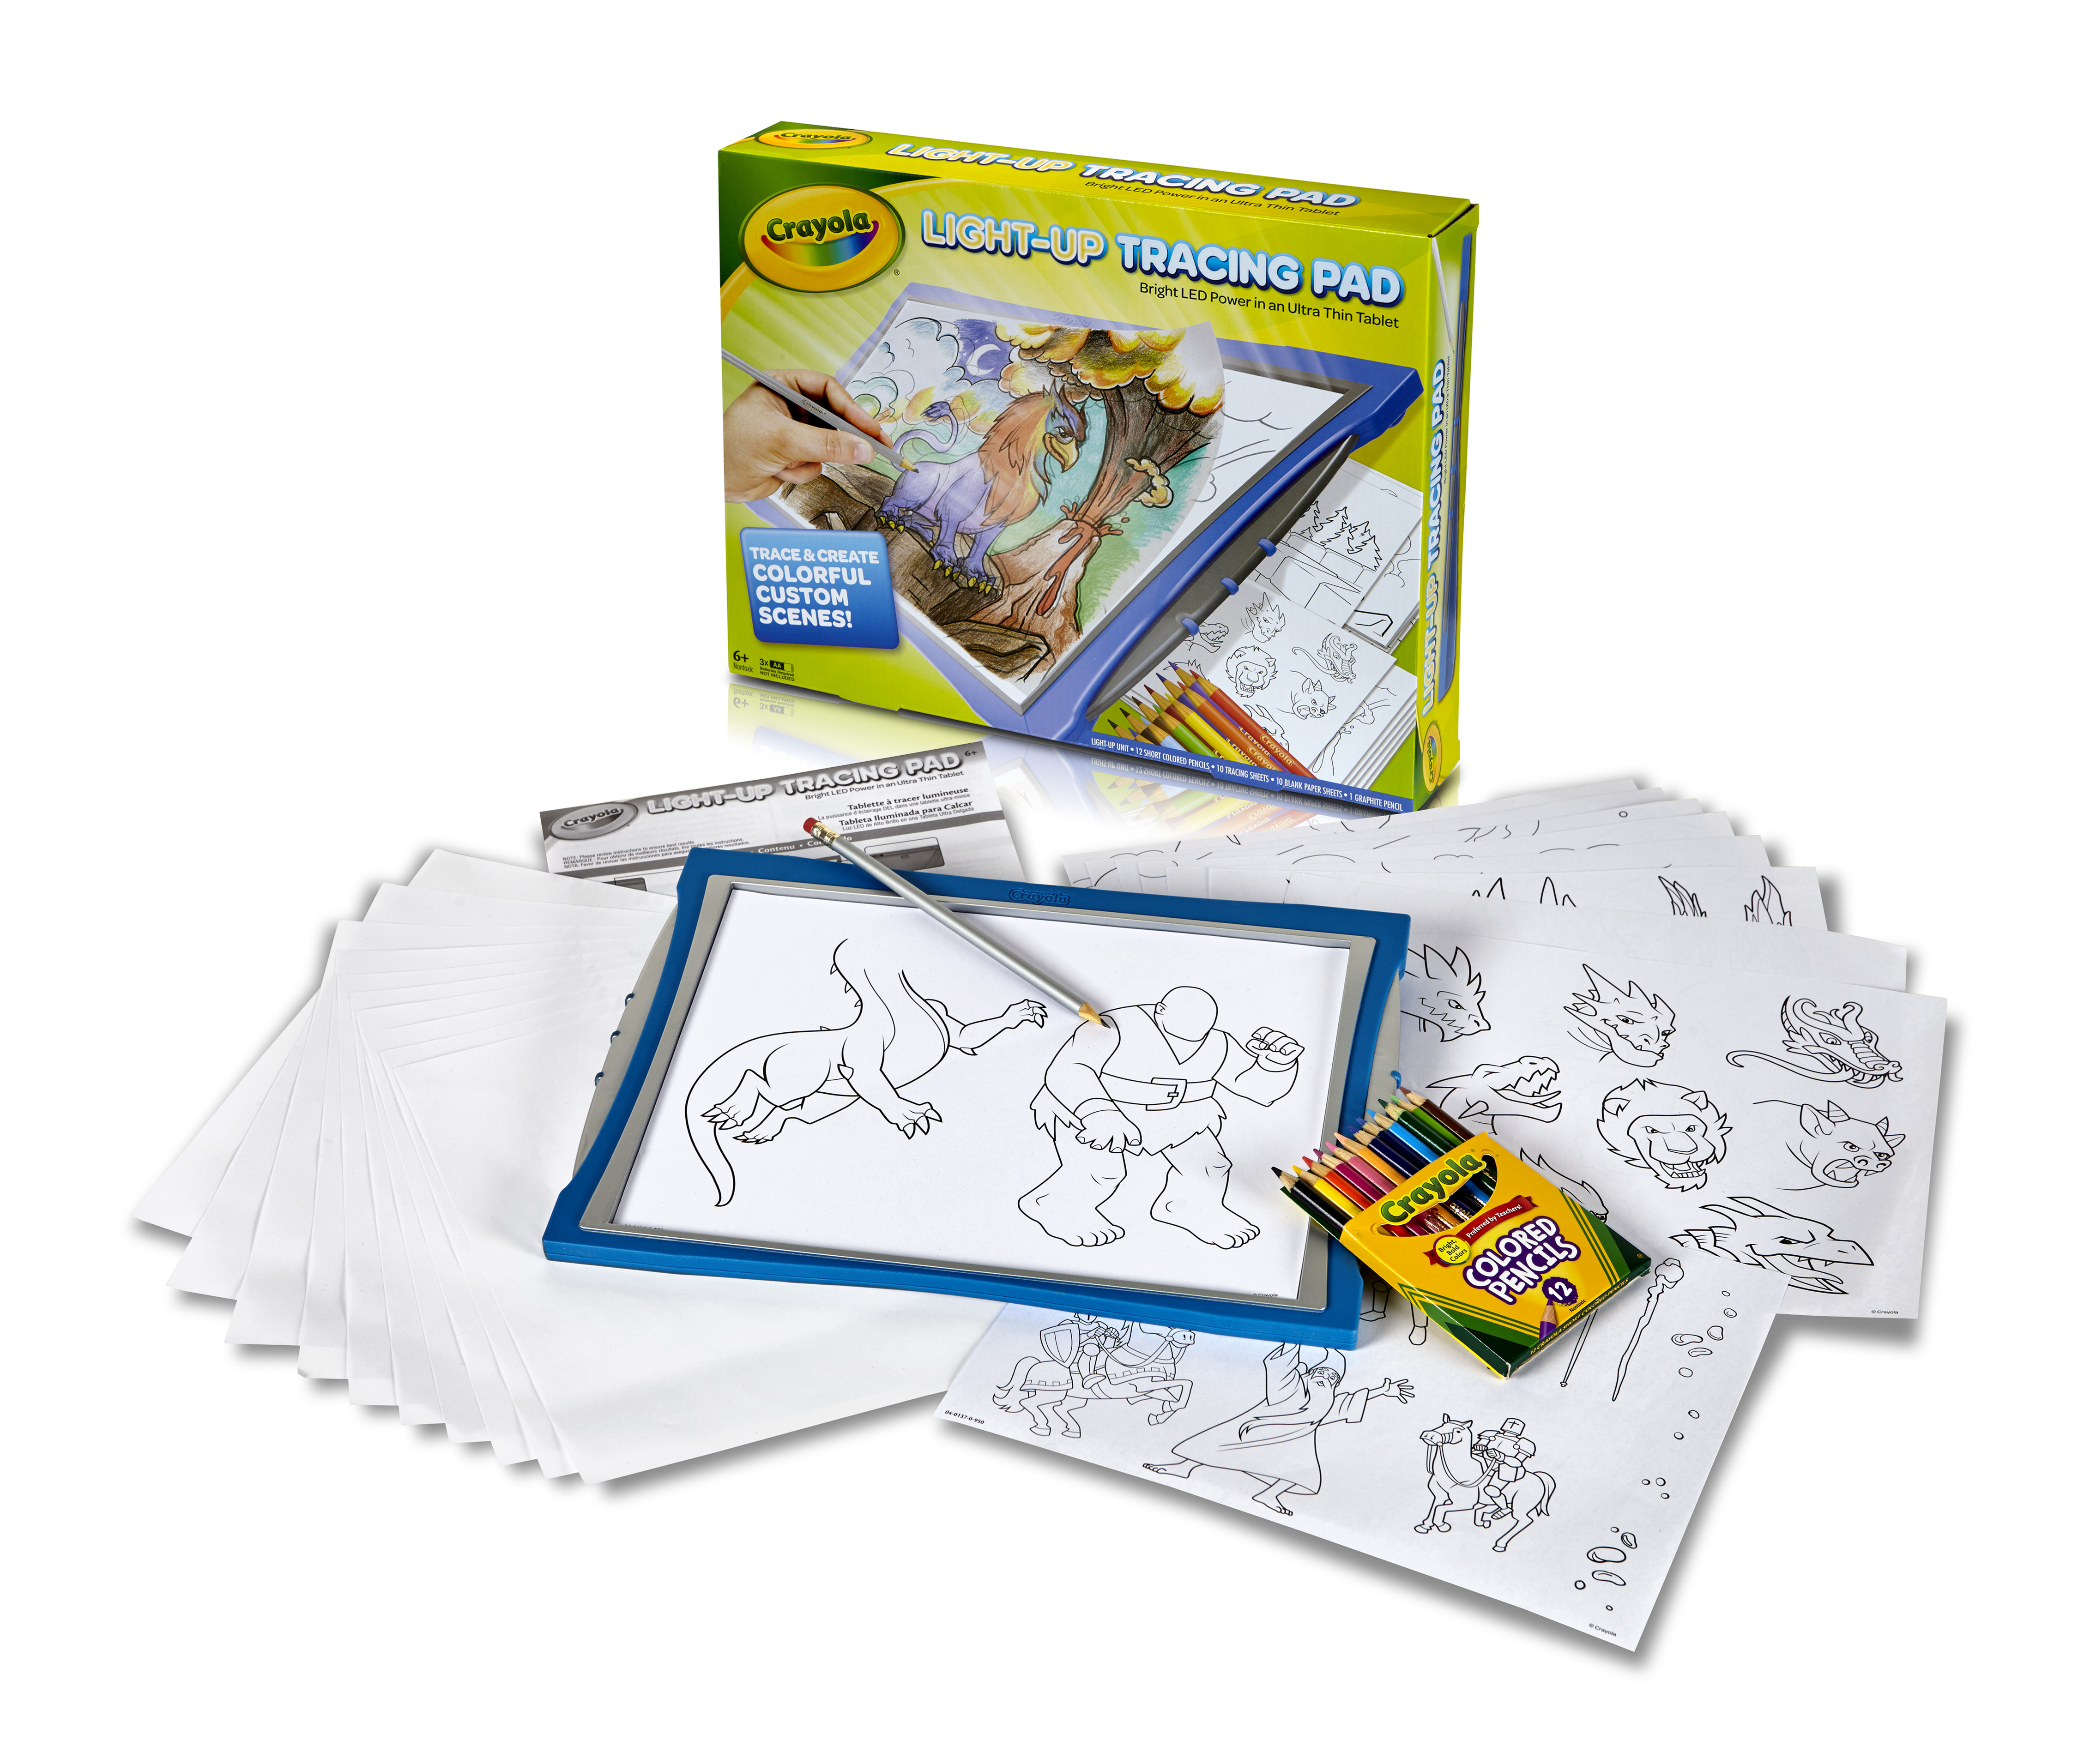 Crayola Light-Up Tracing Pad, Blue, School Supplies, Art Set, Gifts for Girls & Boys, Beginner Child - image 8 of 9